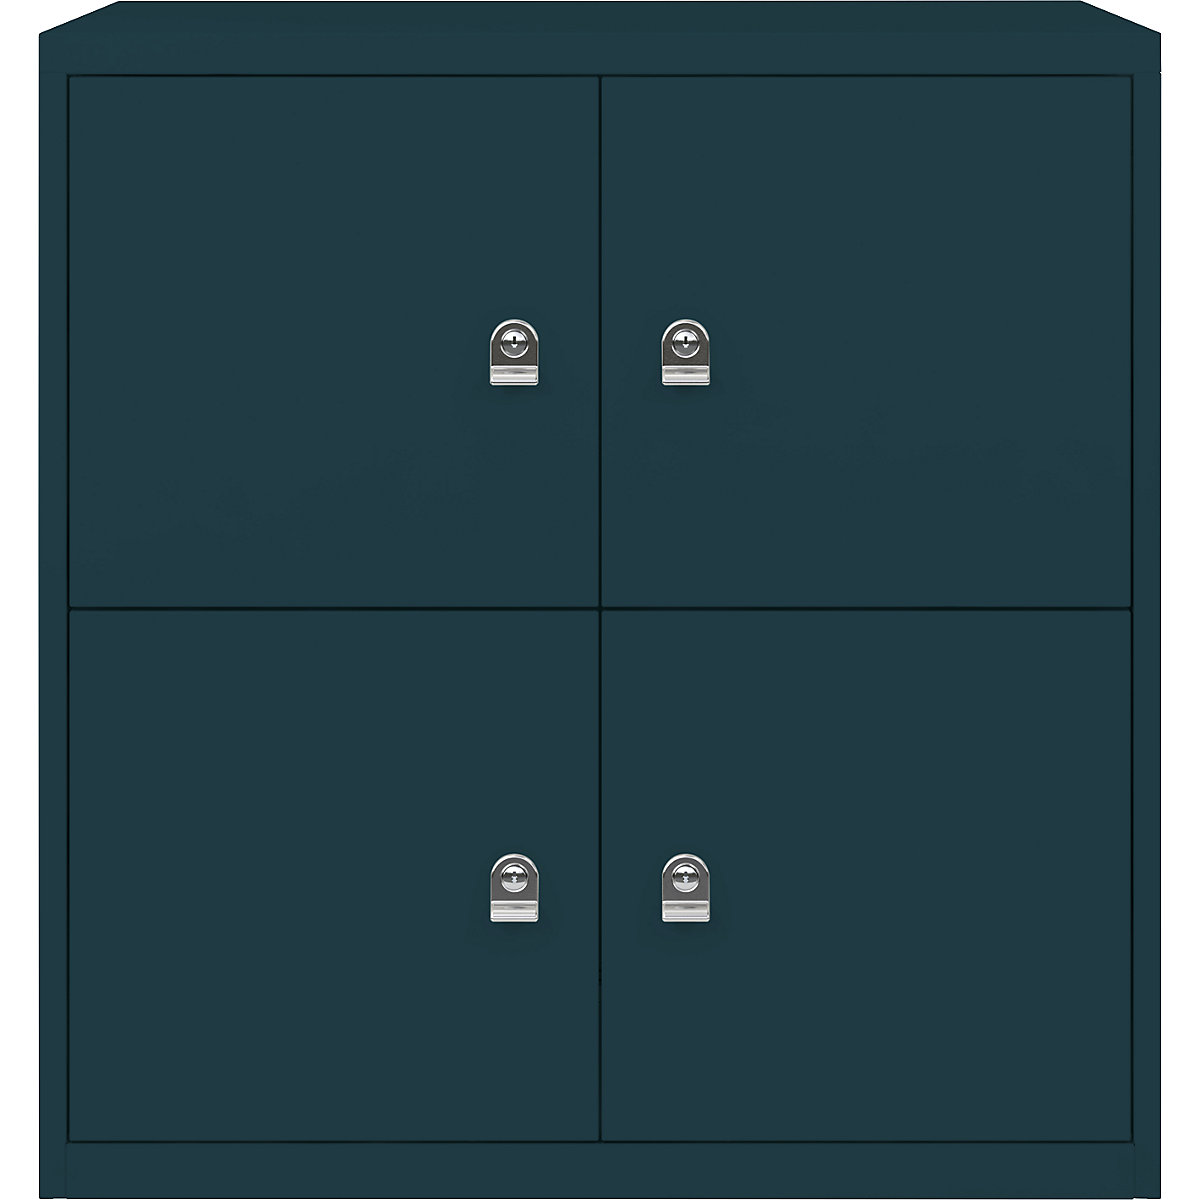 LateralFile™ lodge – BISLEY, with 4 lockable compartments, height 375 mm each, ocean